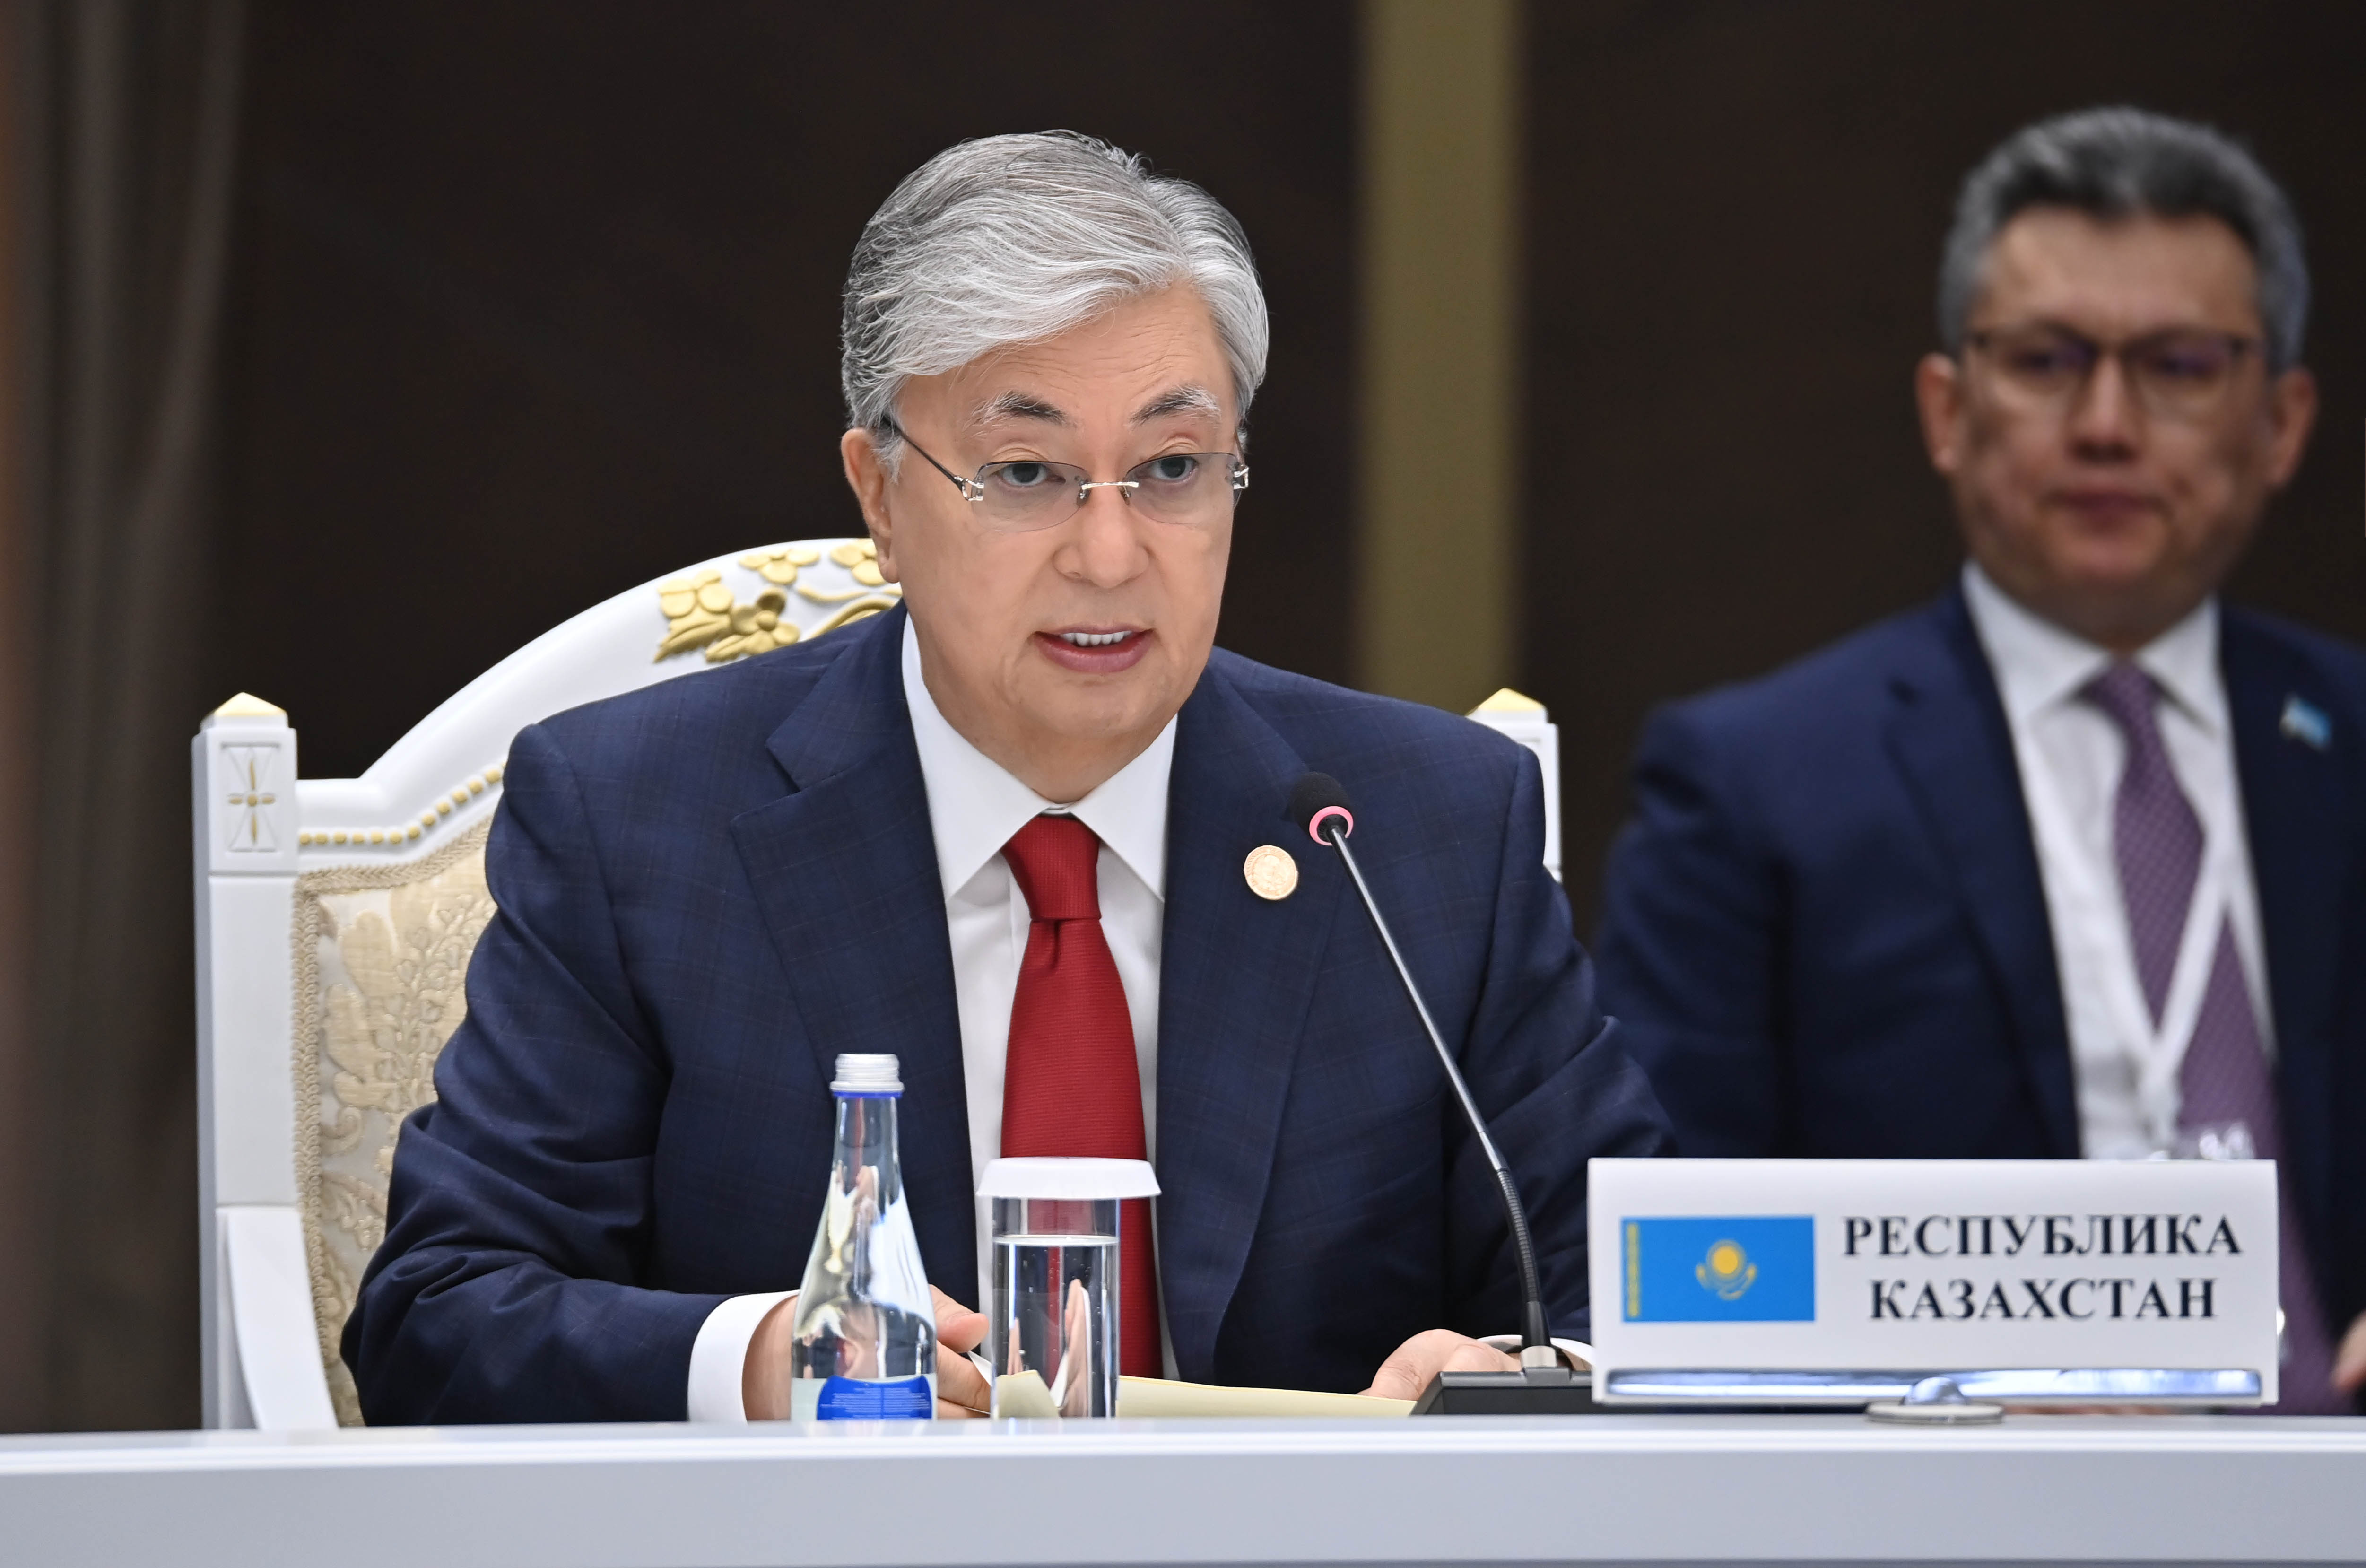 PRESIDENT TOKAYEV CALLS FOR INCREASED REGIONAL COOPERATION AT THE CONSULTATIVE MEETING OF CENTRAL ASIAN LEADERS